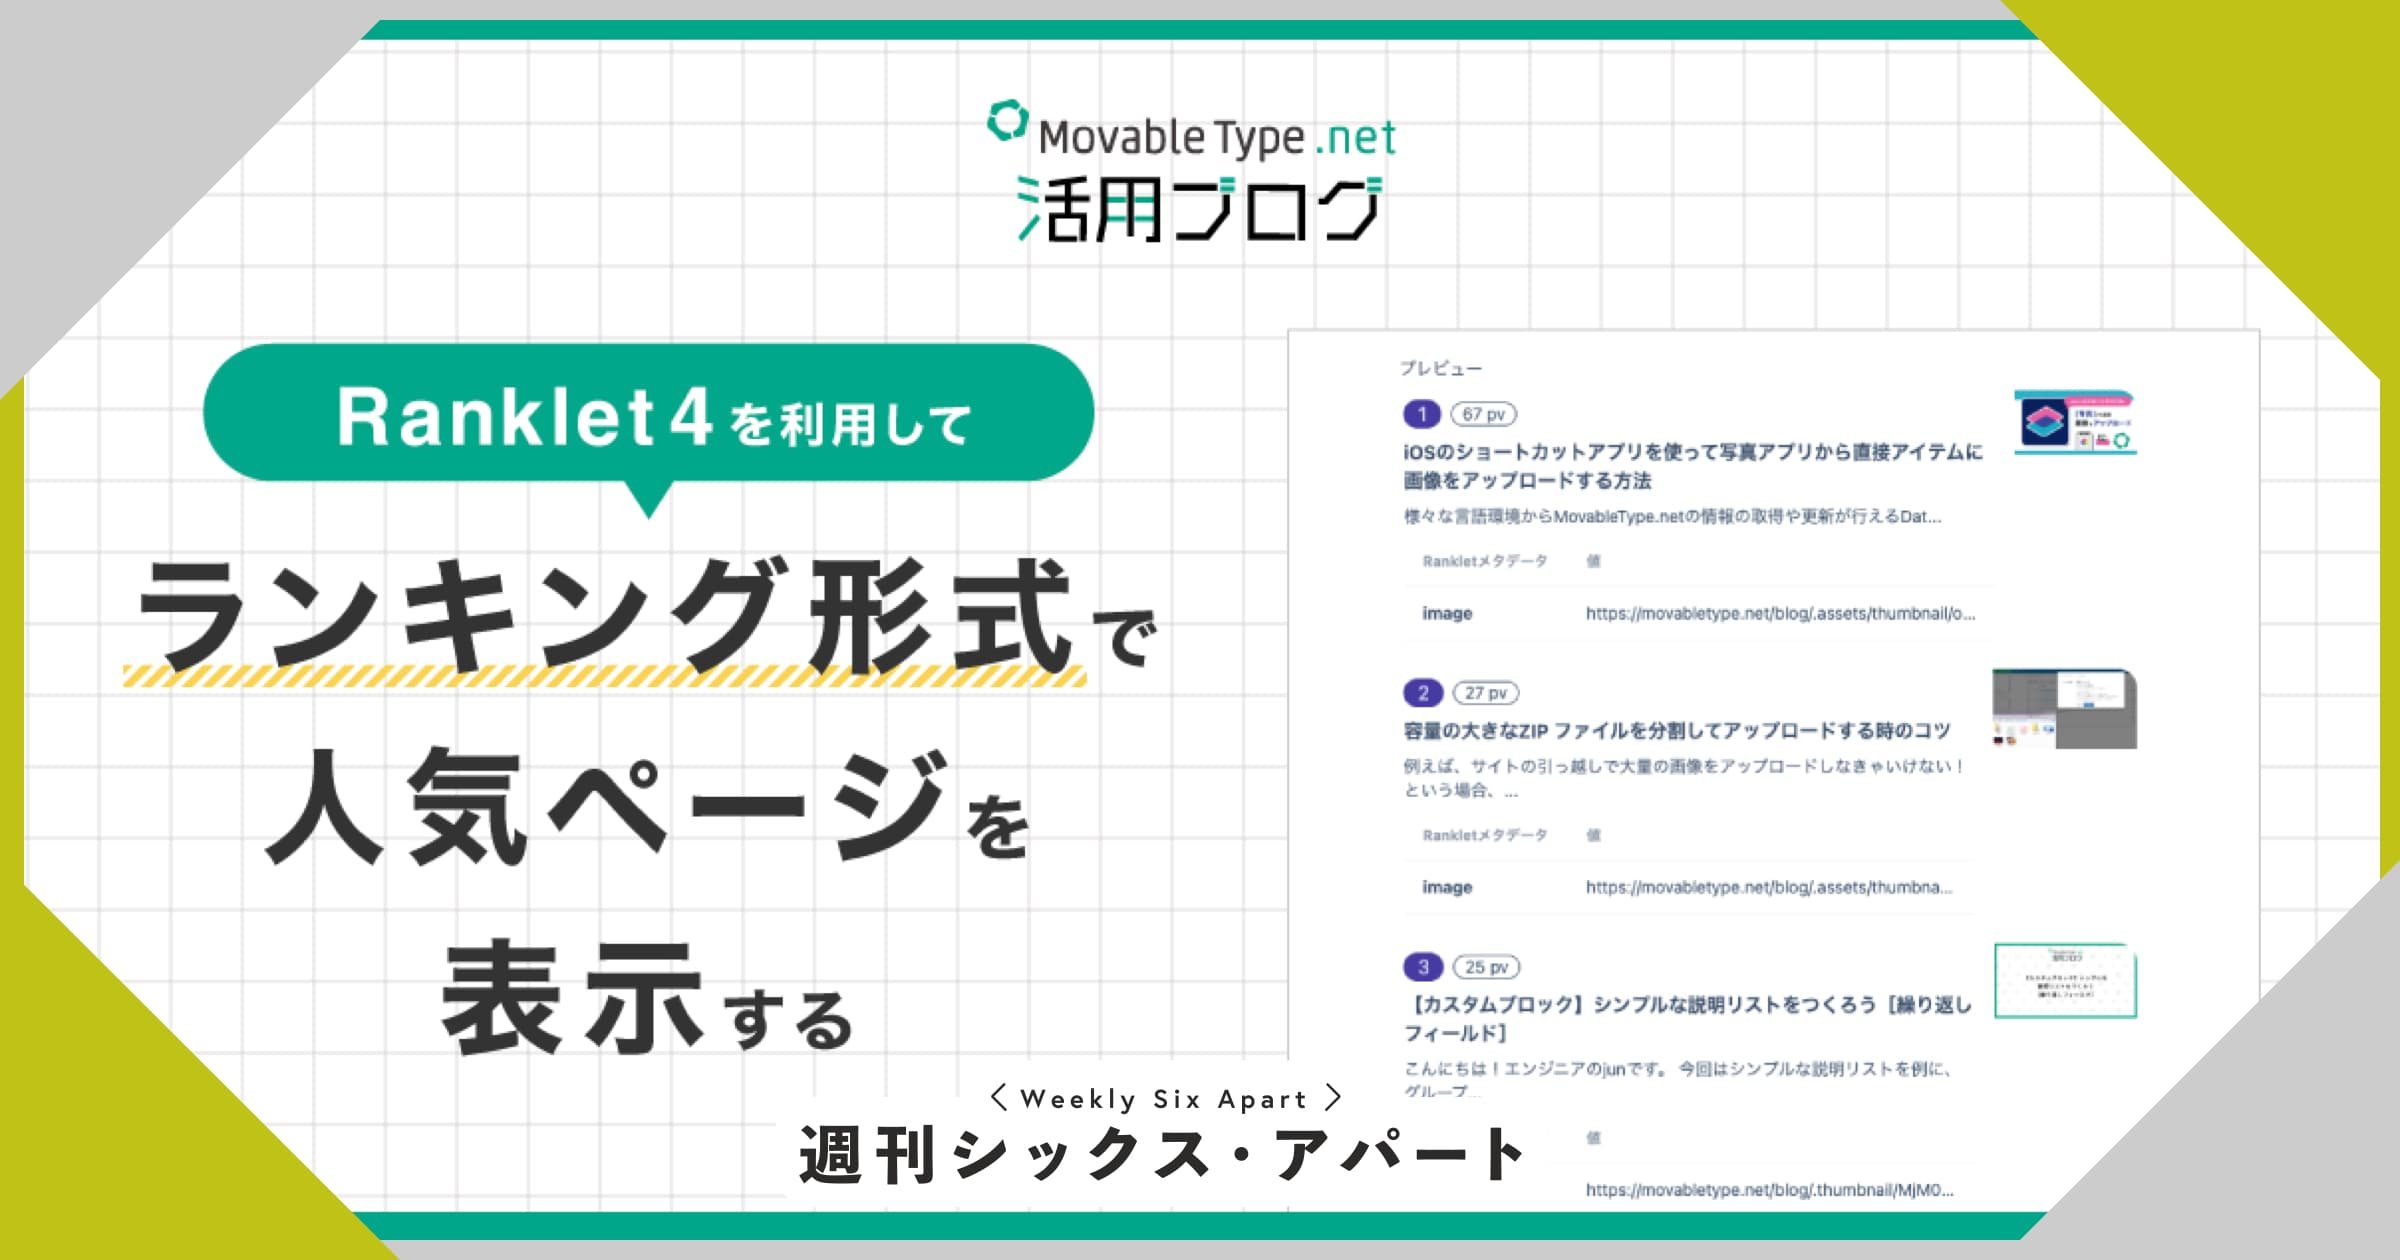 Ranklet4で人気ページを表示 - MovableType.net 活用ブログ新記事紹介 #週刊SA